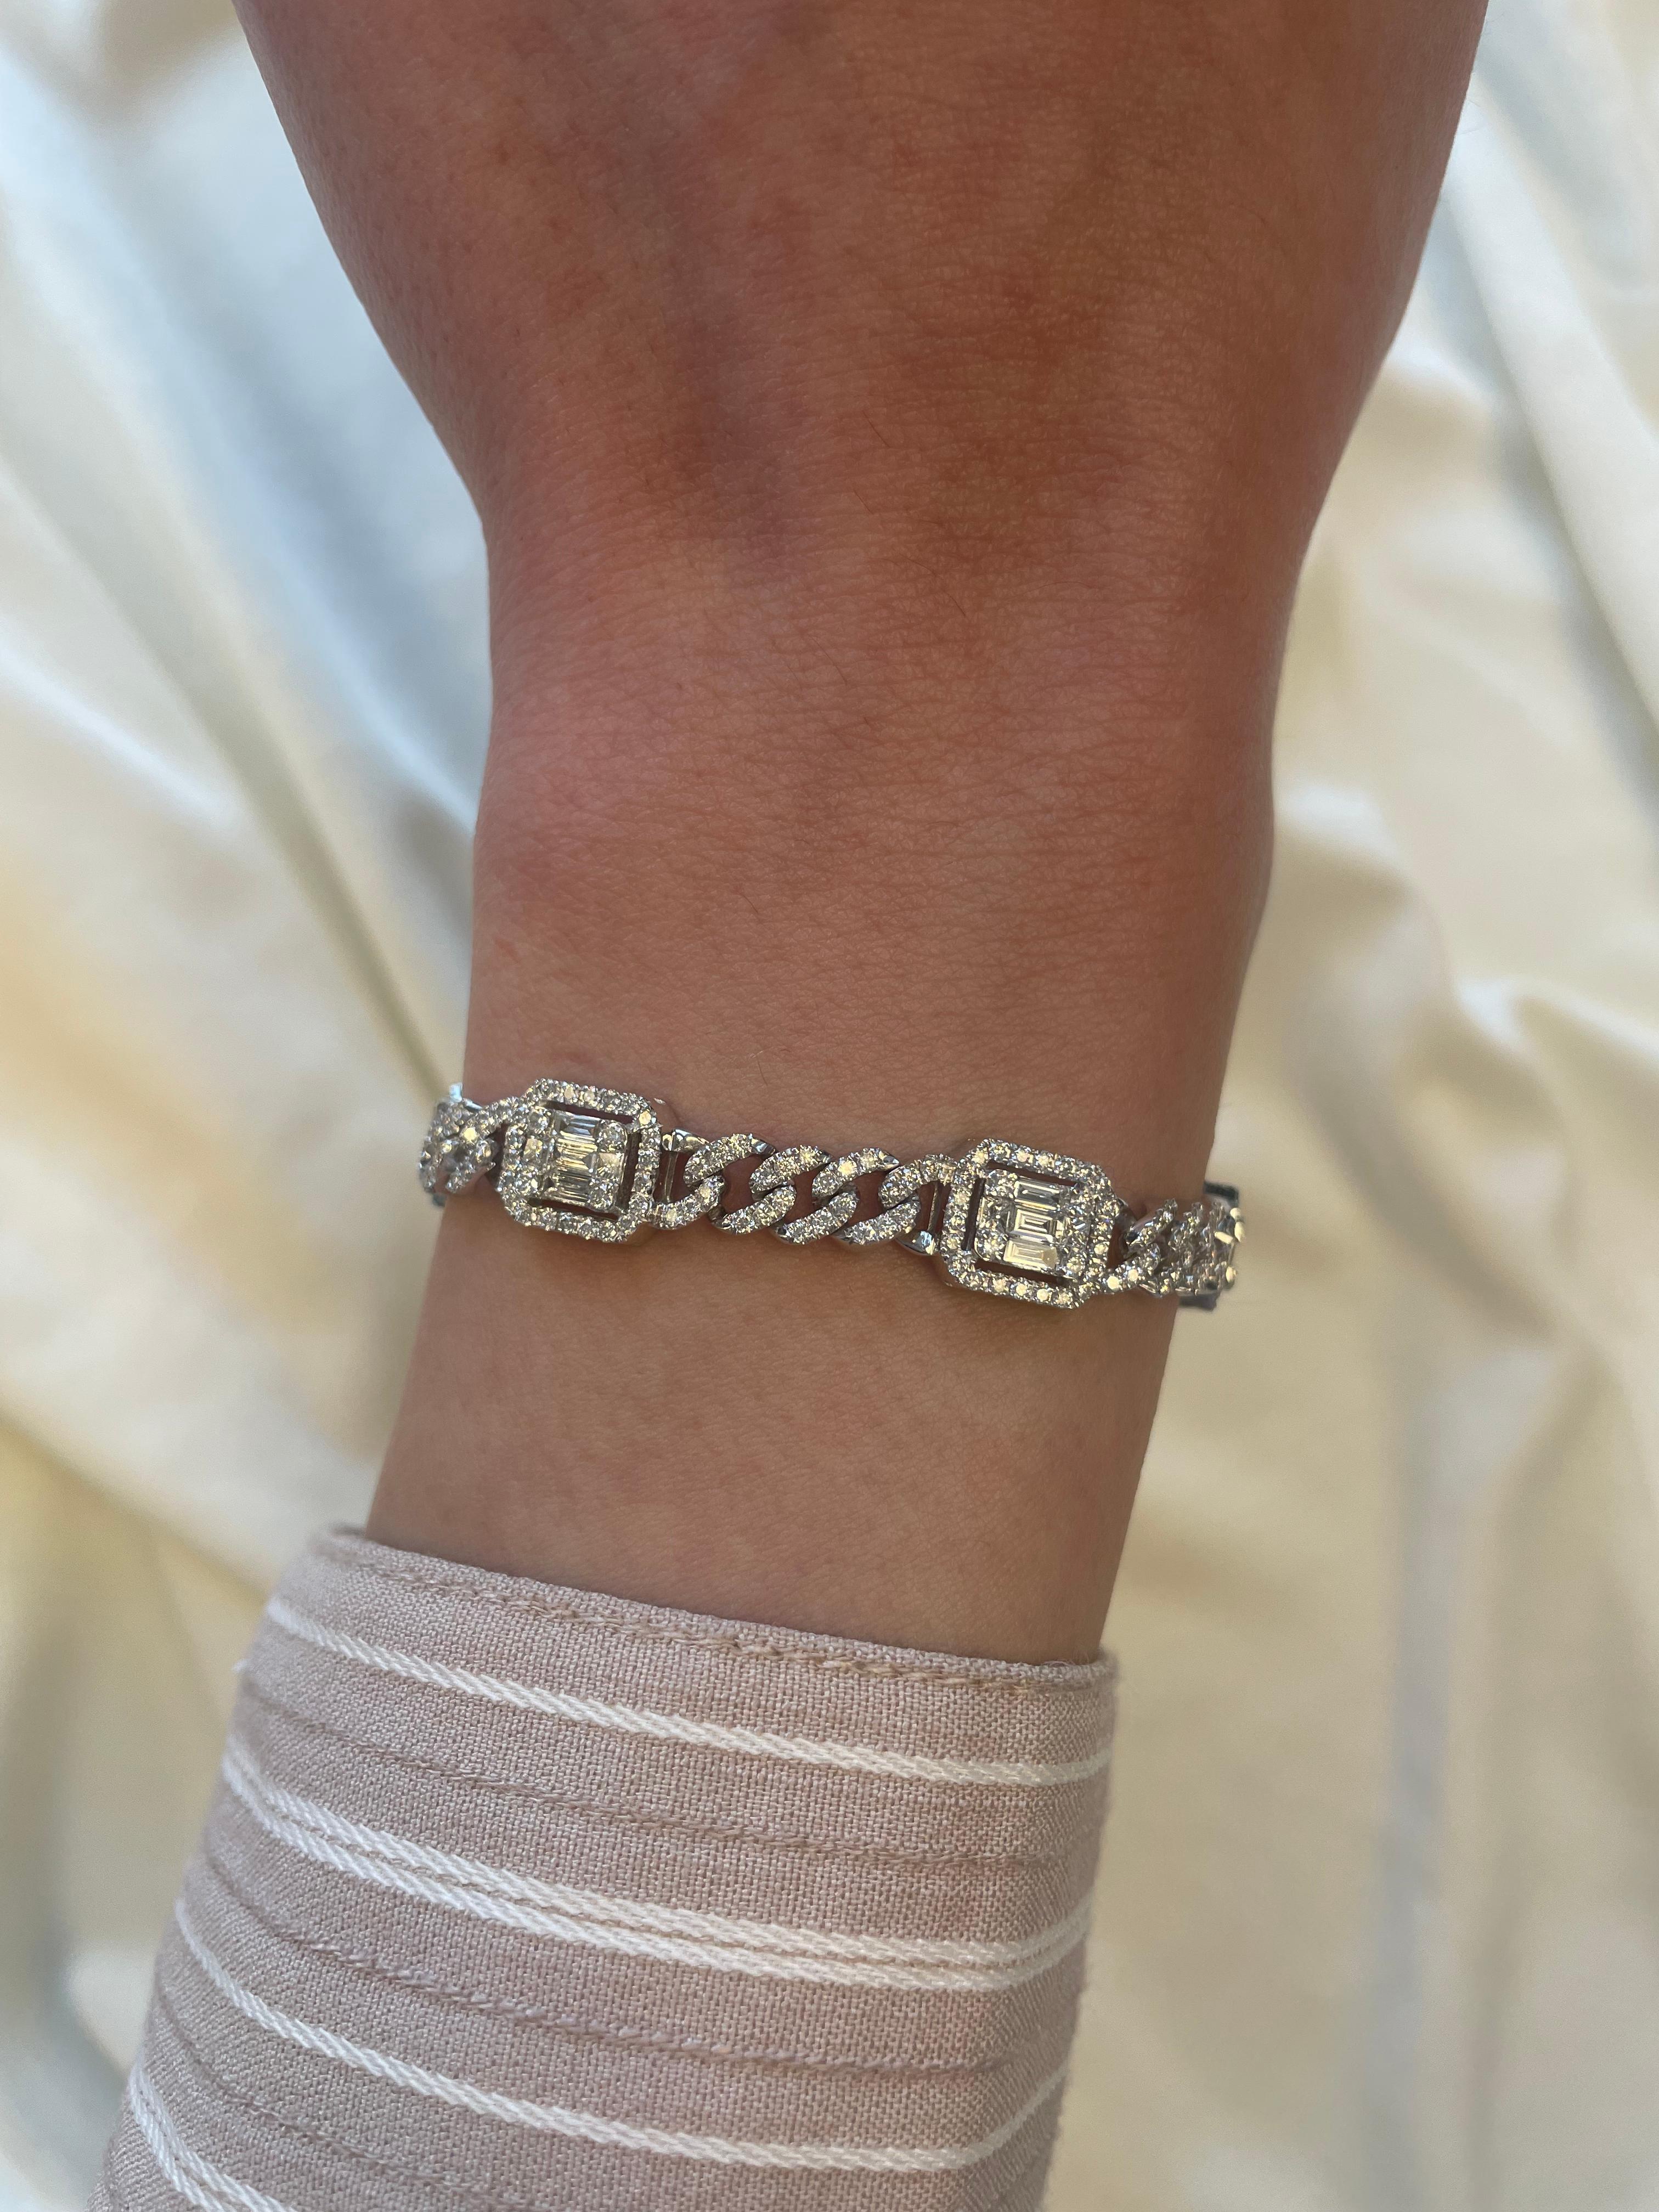 Modern diamond cuban link bracelet with illusion set diamonds. 
385 round brilliant diamonds, 3.95 carats total. Approximately G/H color and SI clarity. 18k white gold, 21.90 grams, 7 inches.
Accommodated with an up-to-date appraisal by a GIA G.G.